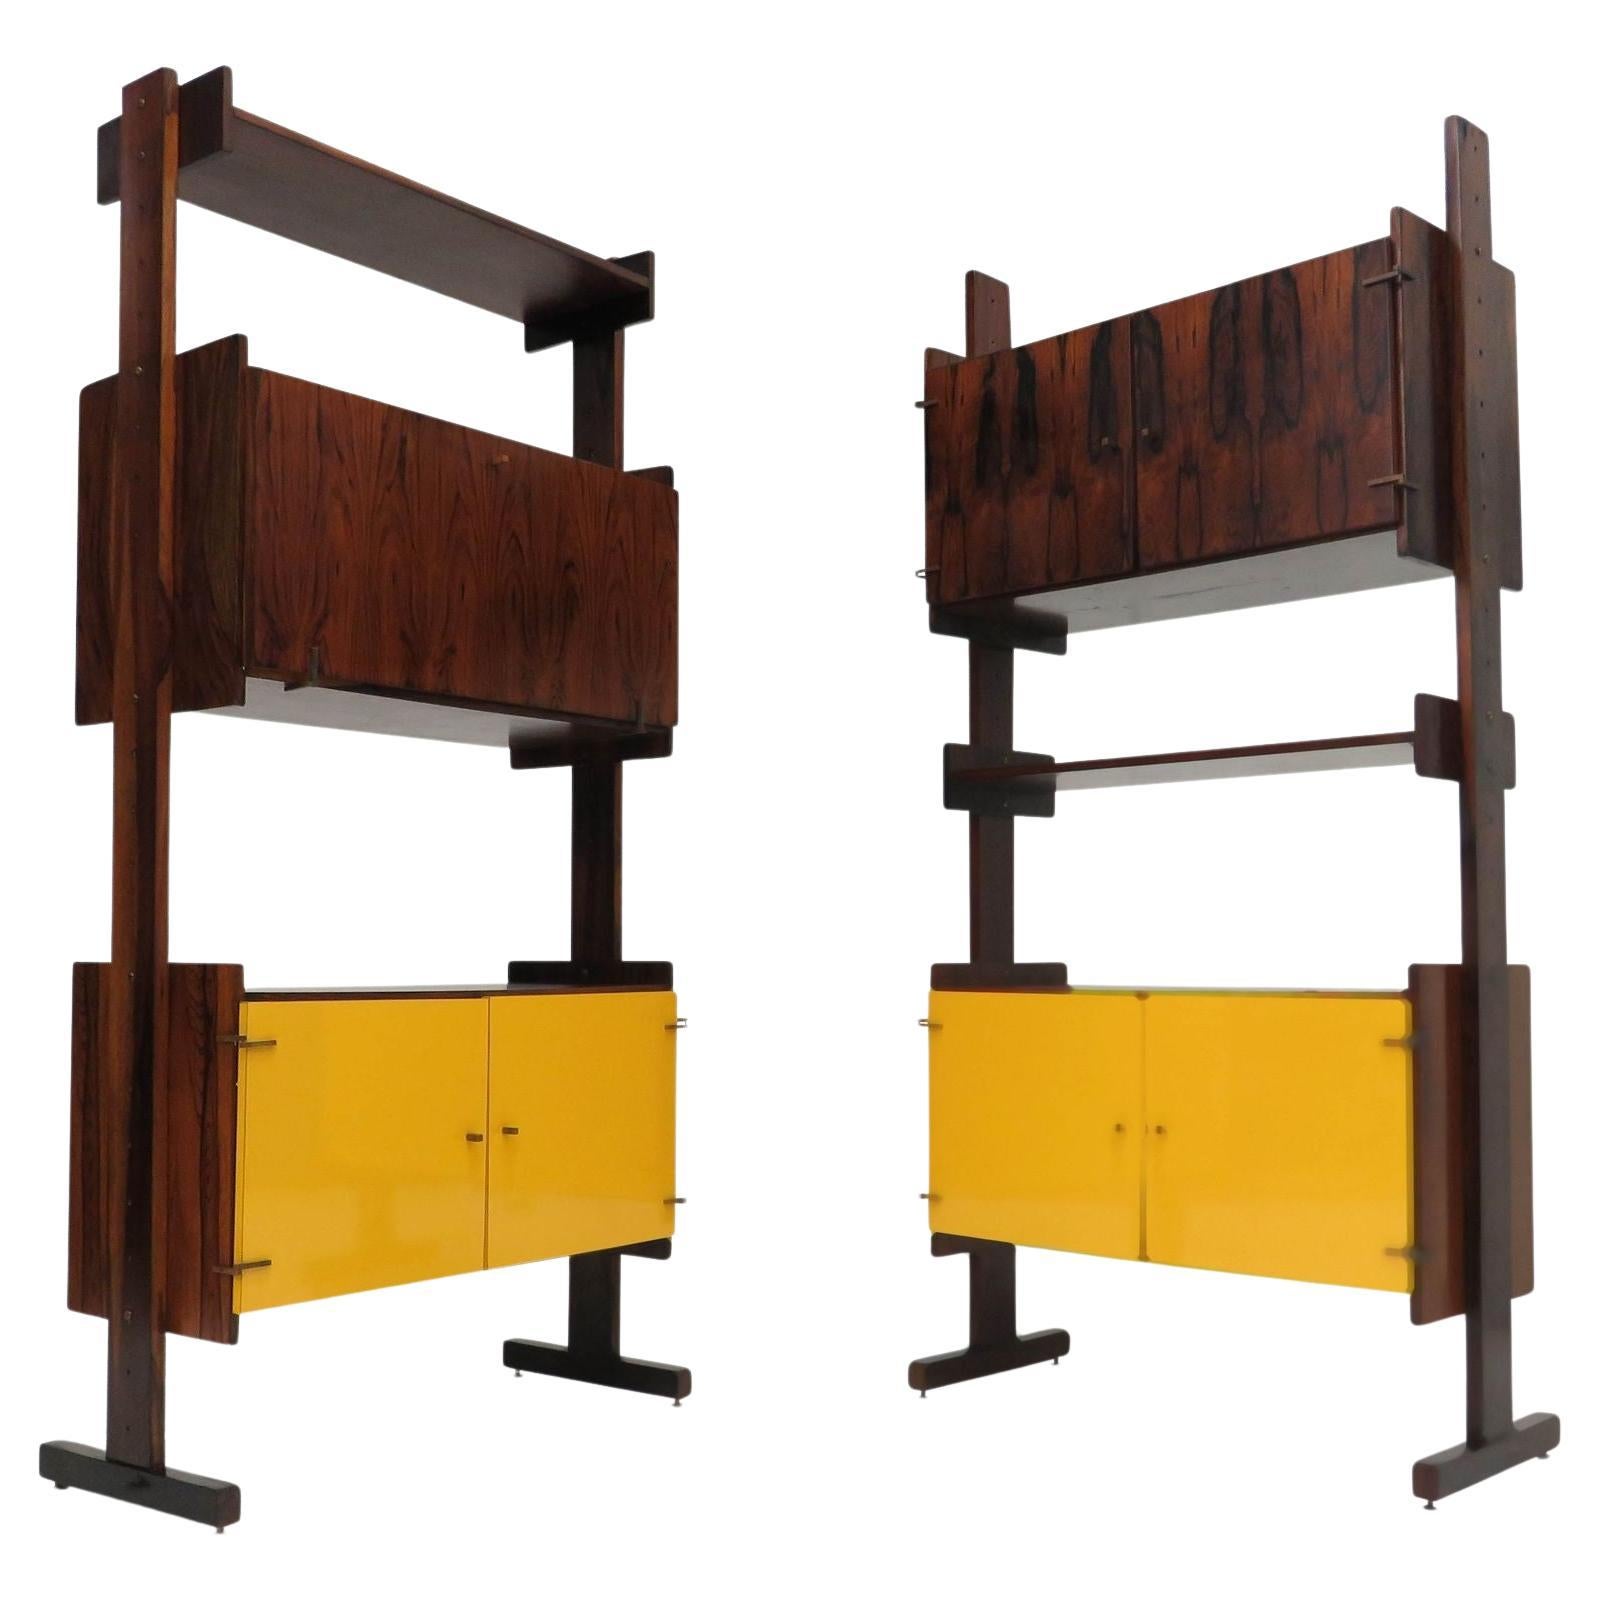 Brazil Rosewood Room Divider Bookcase or Wall Unit in Yellow